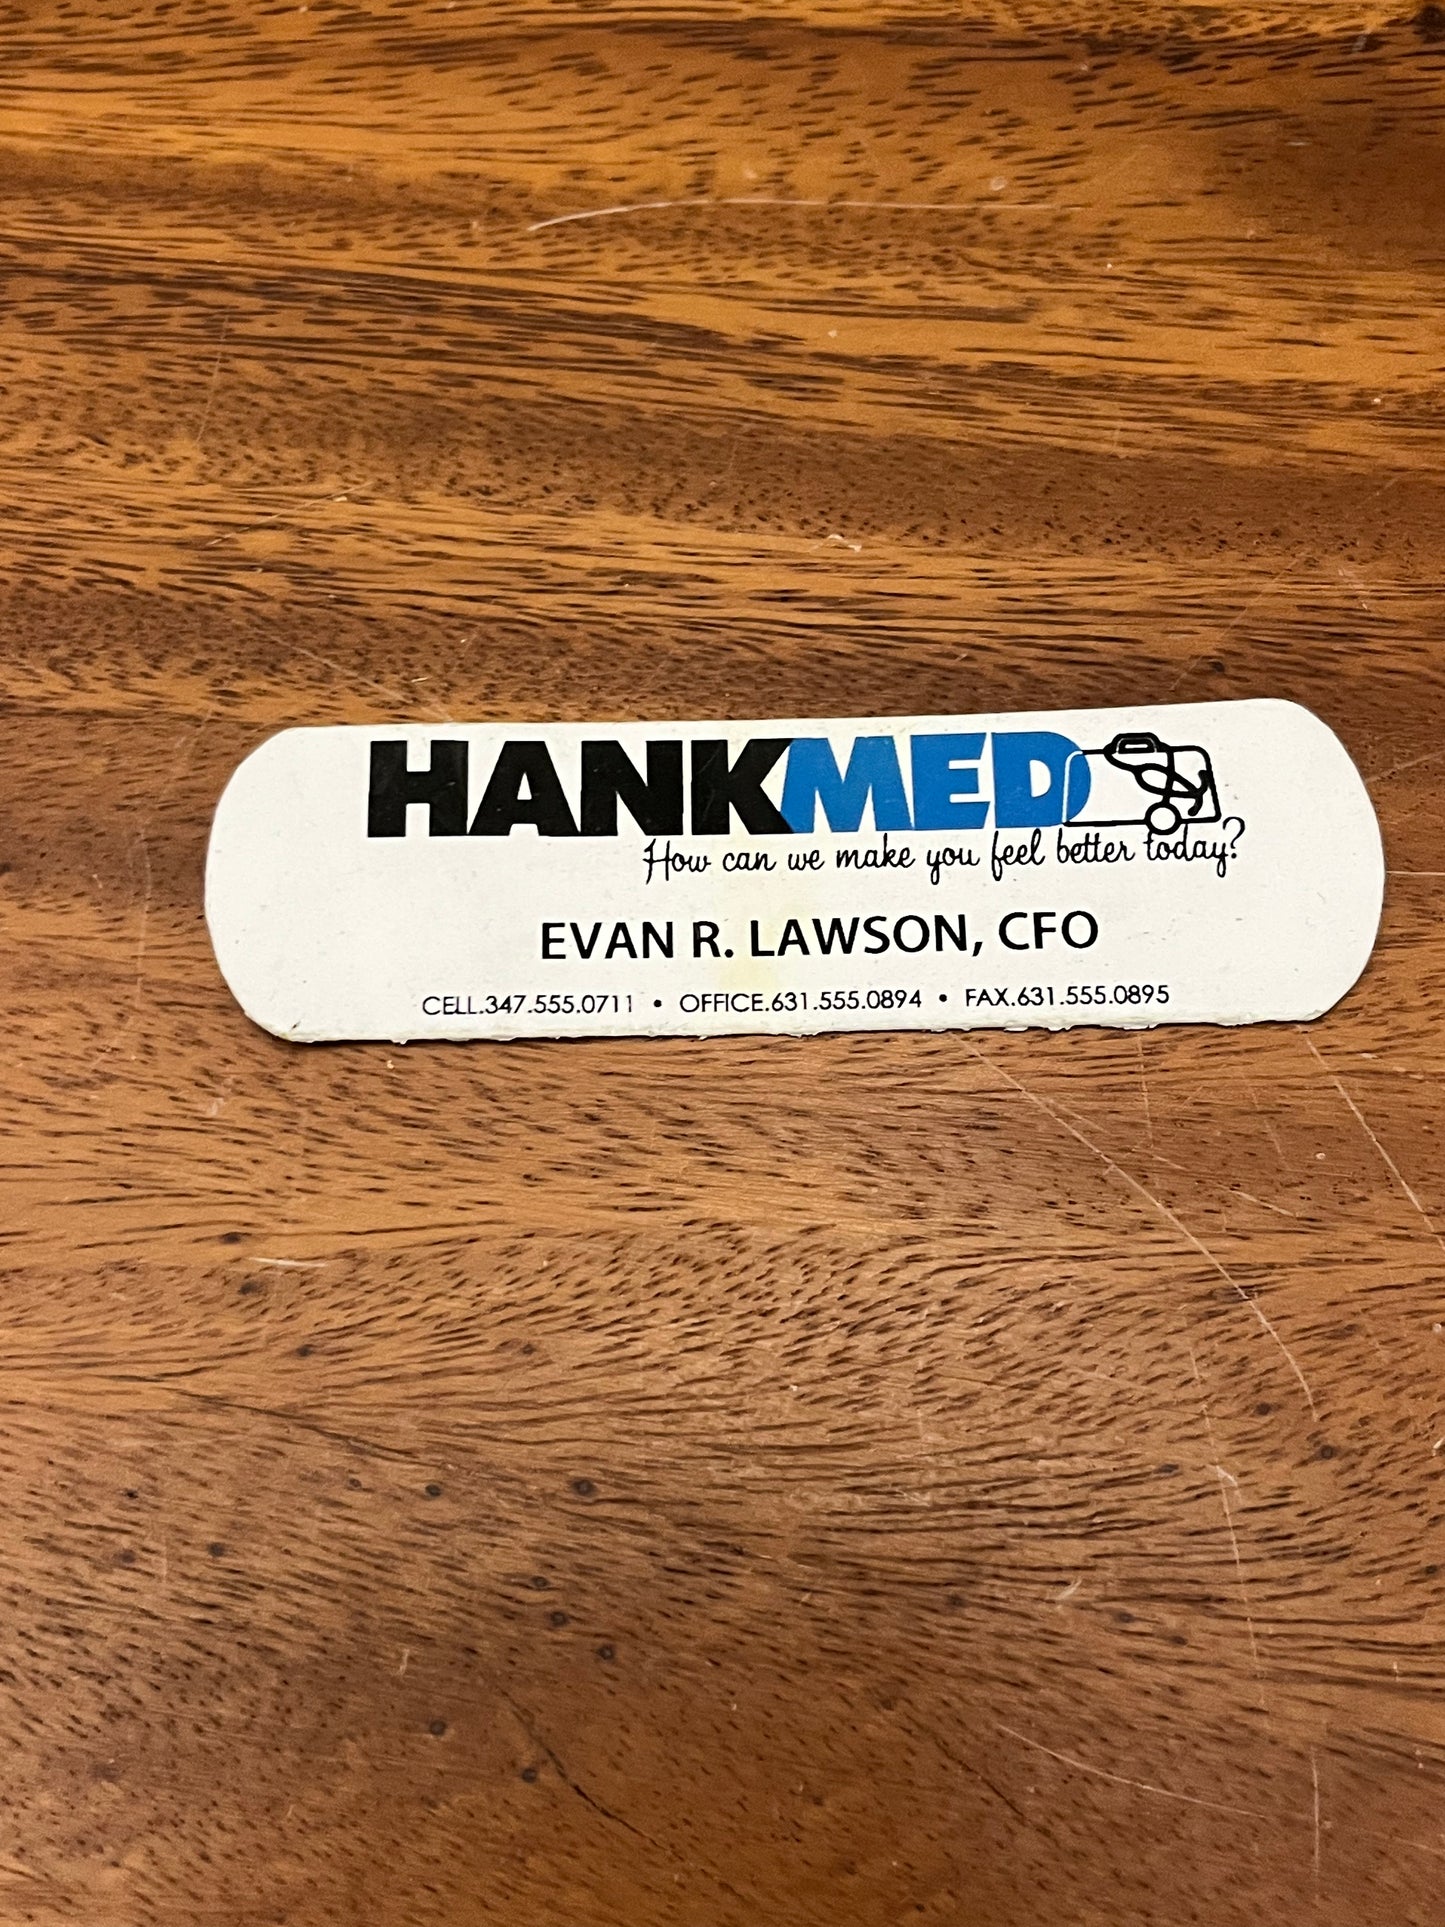 Royal Pains: Evan Lawson’s HANKMED Business Cards (2)